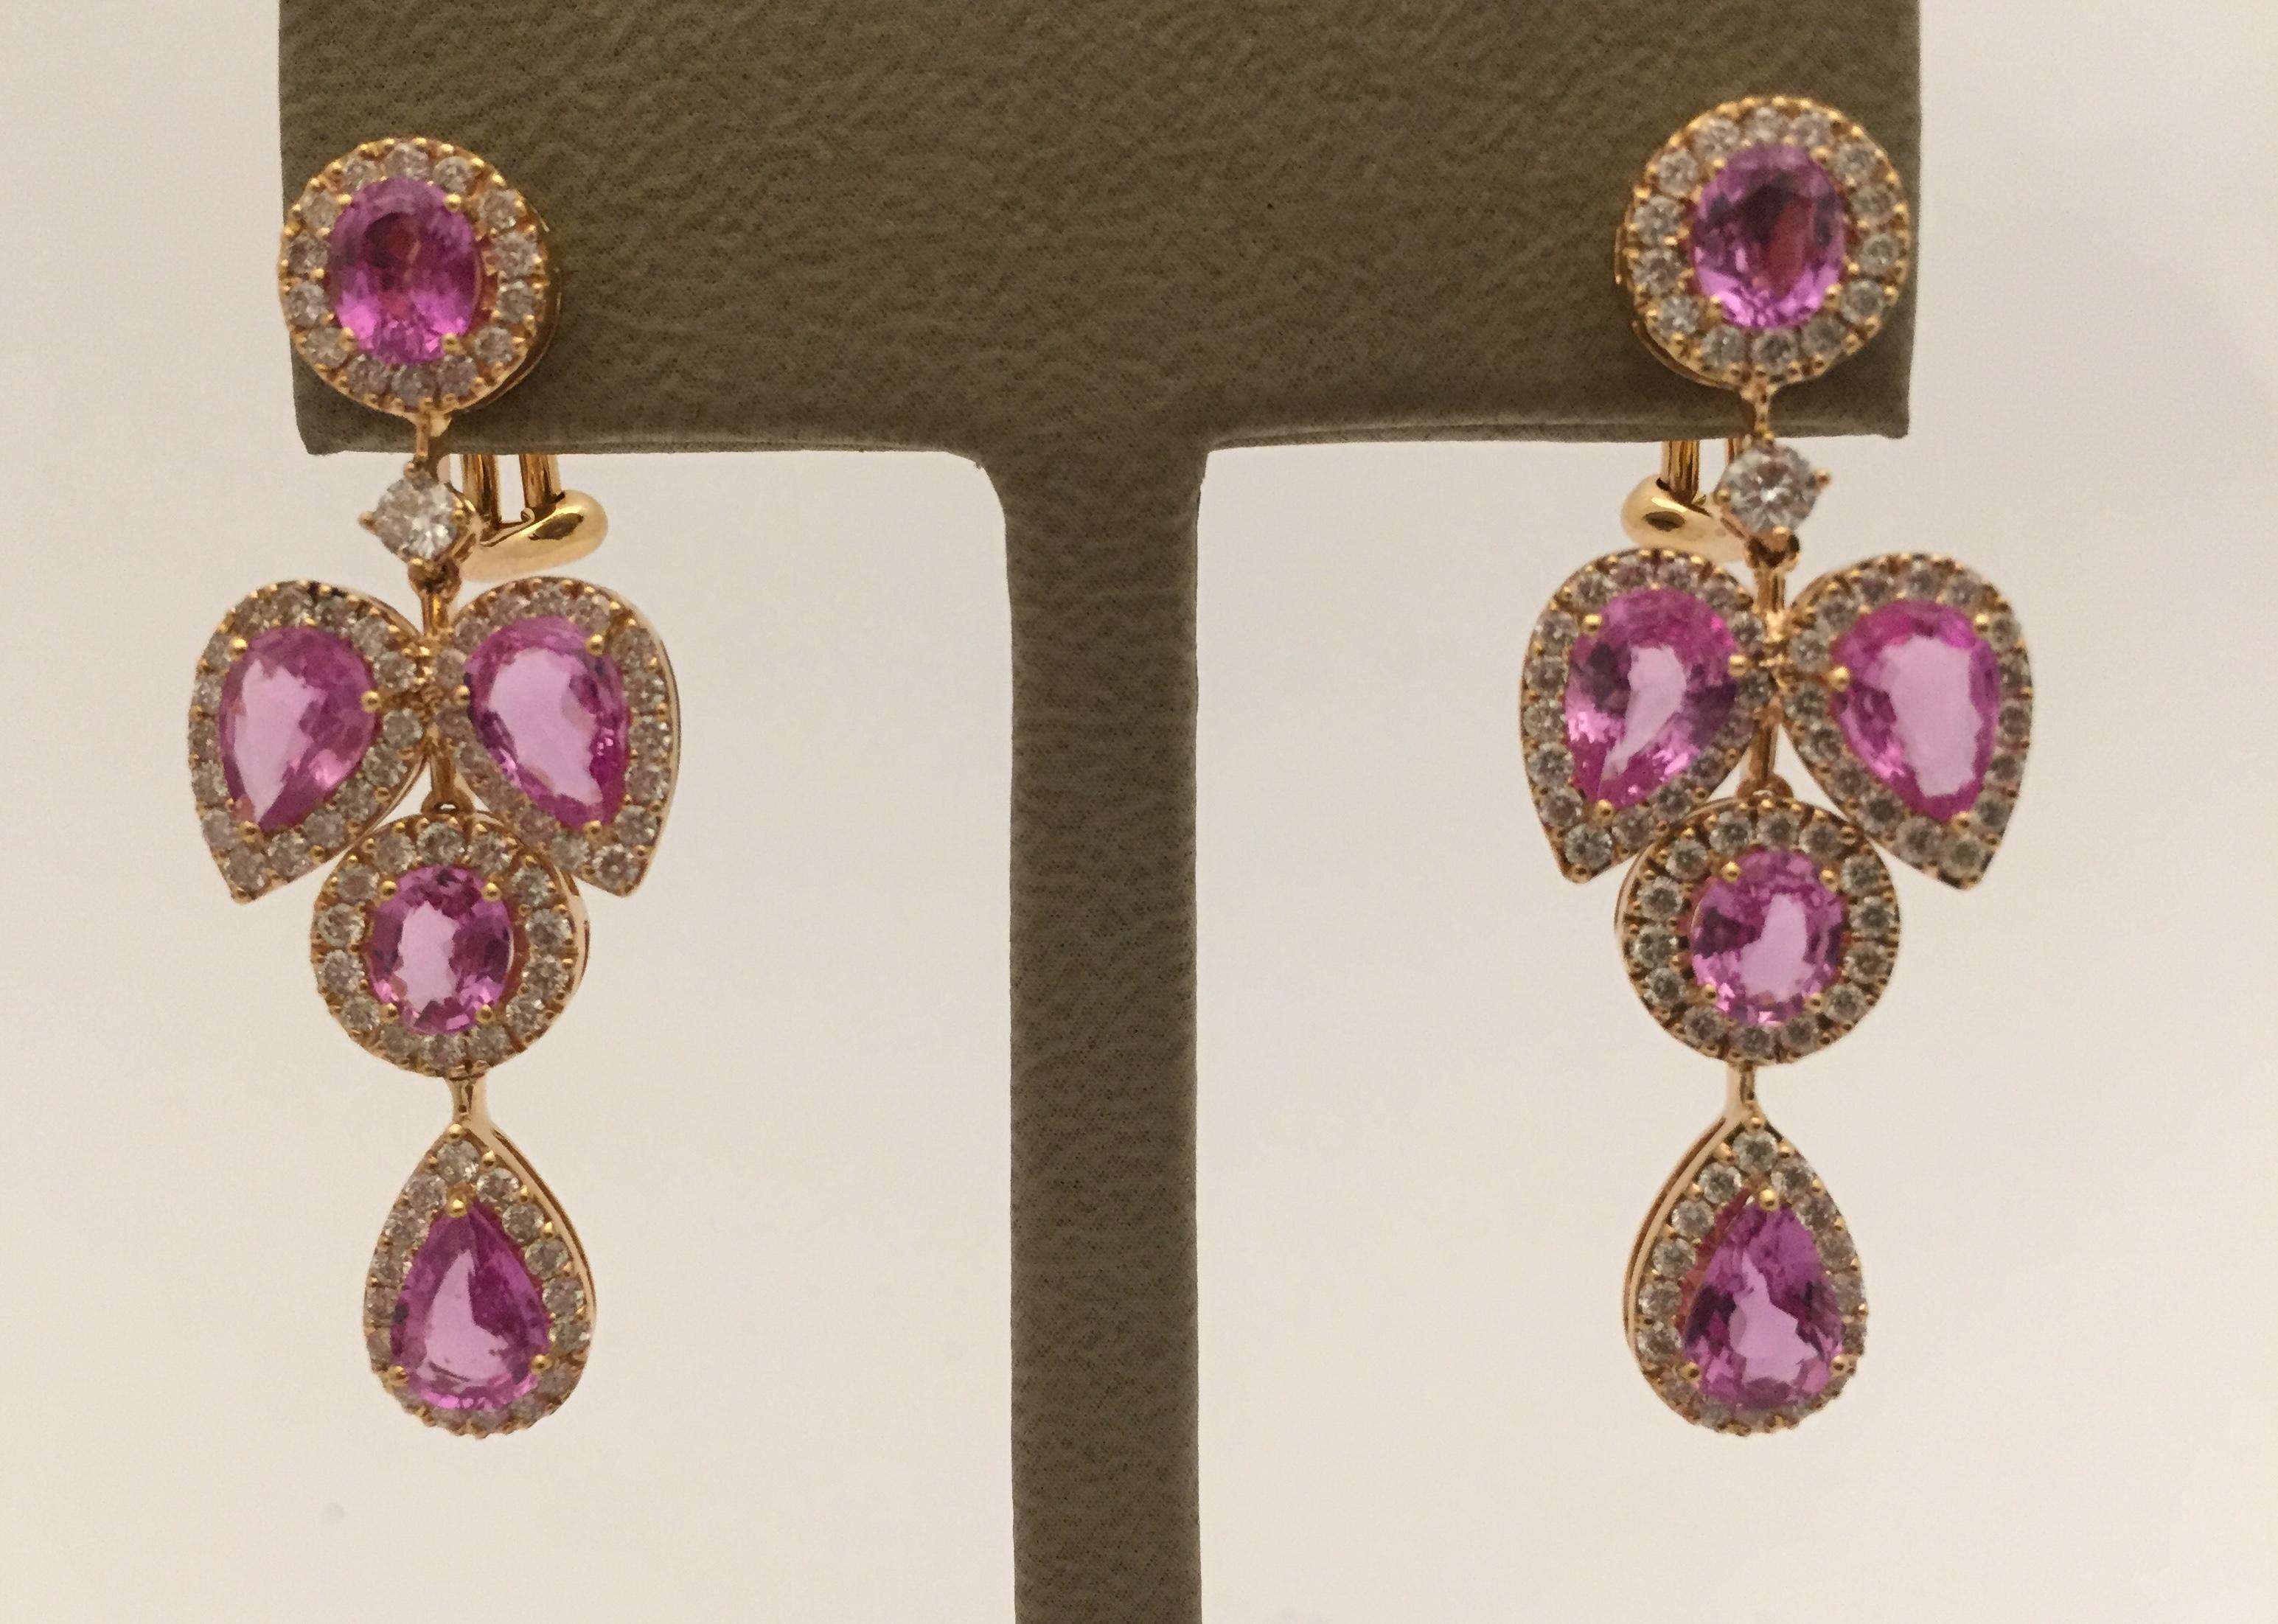 Elegant, and opulent, these wonderful chandelier earrings feature 10 vibrant, pink sapphires of total 6.96 ct. They are surrounded with 154 diamonds, G color, vs clarity of total 1.78 ct.